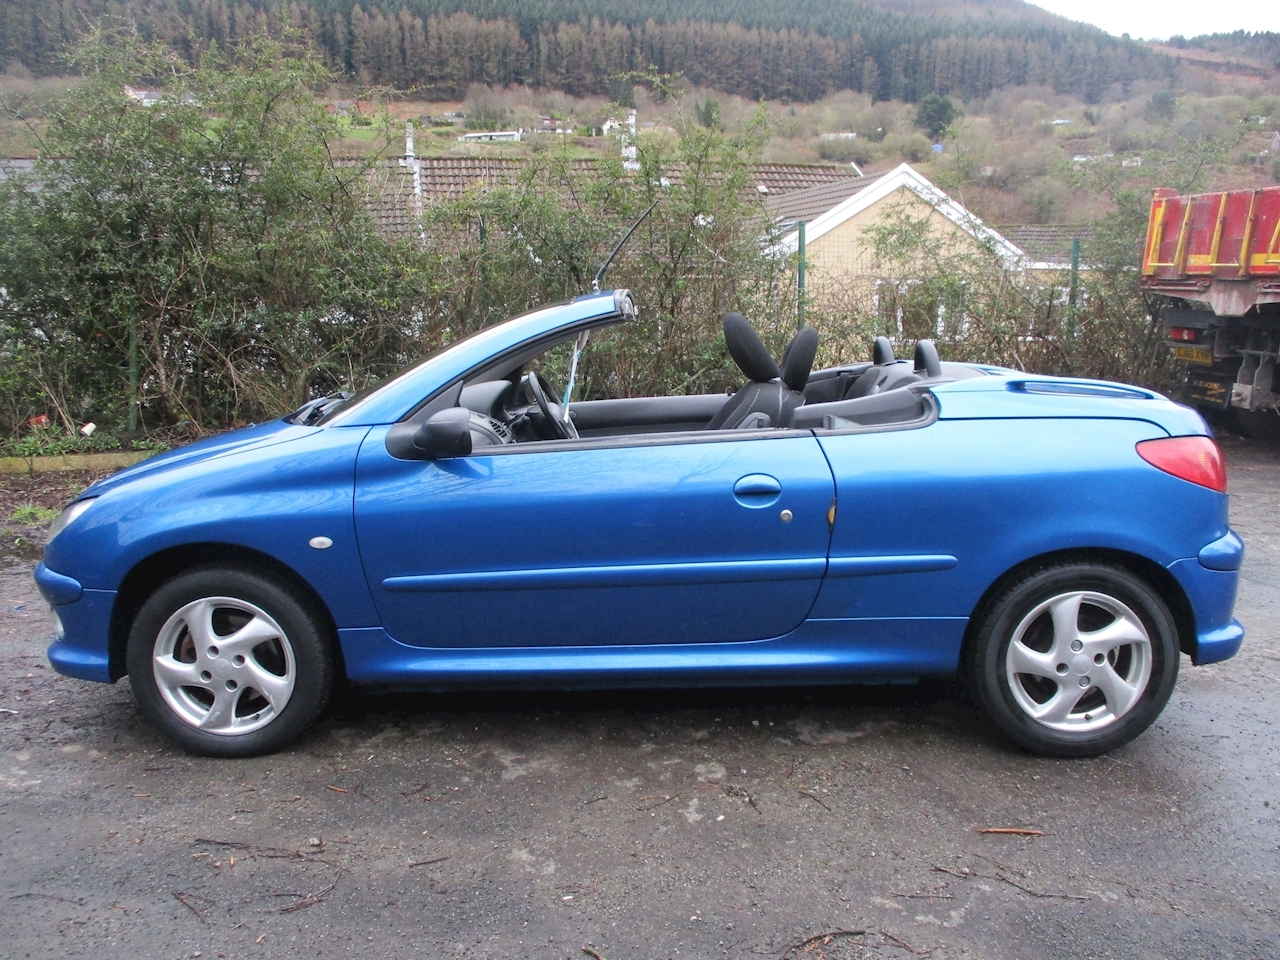 206 Coupe Cabriolet S Coupe 1.6 Manual Petrol